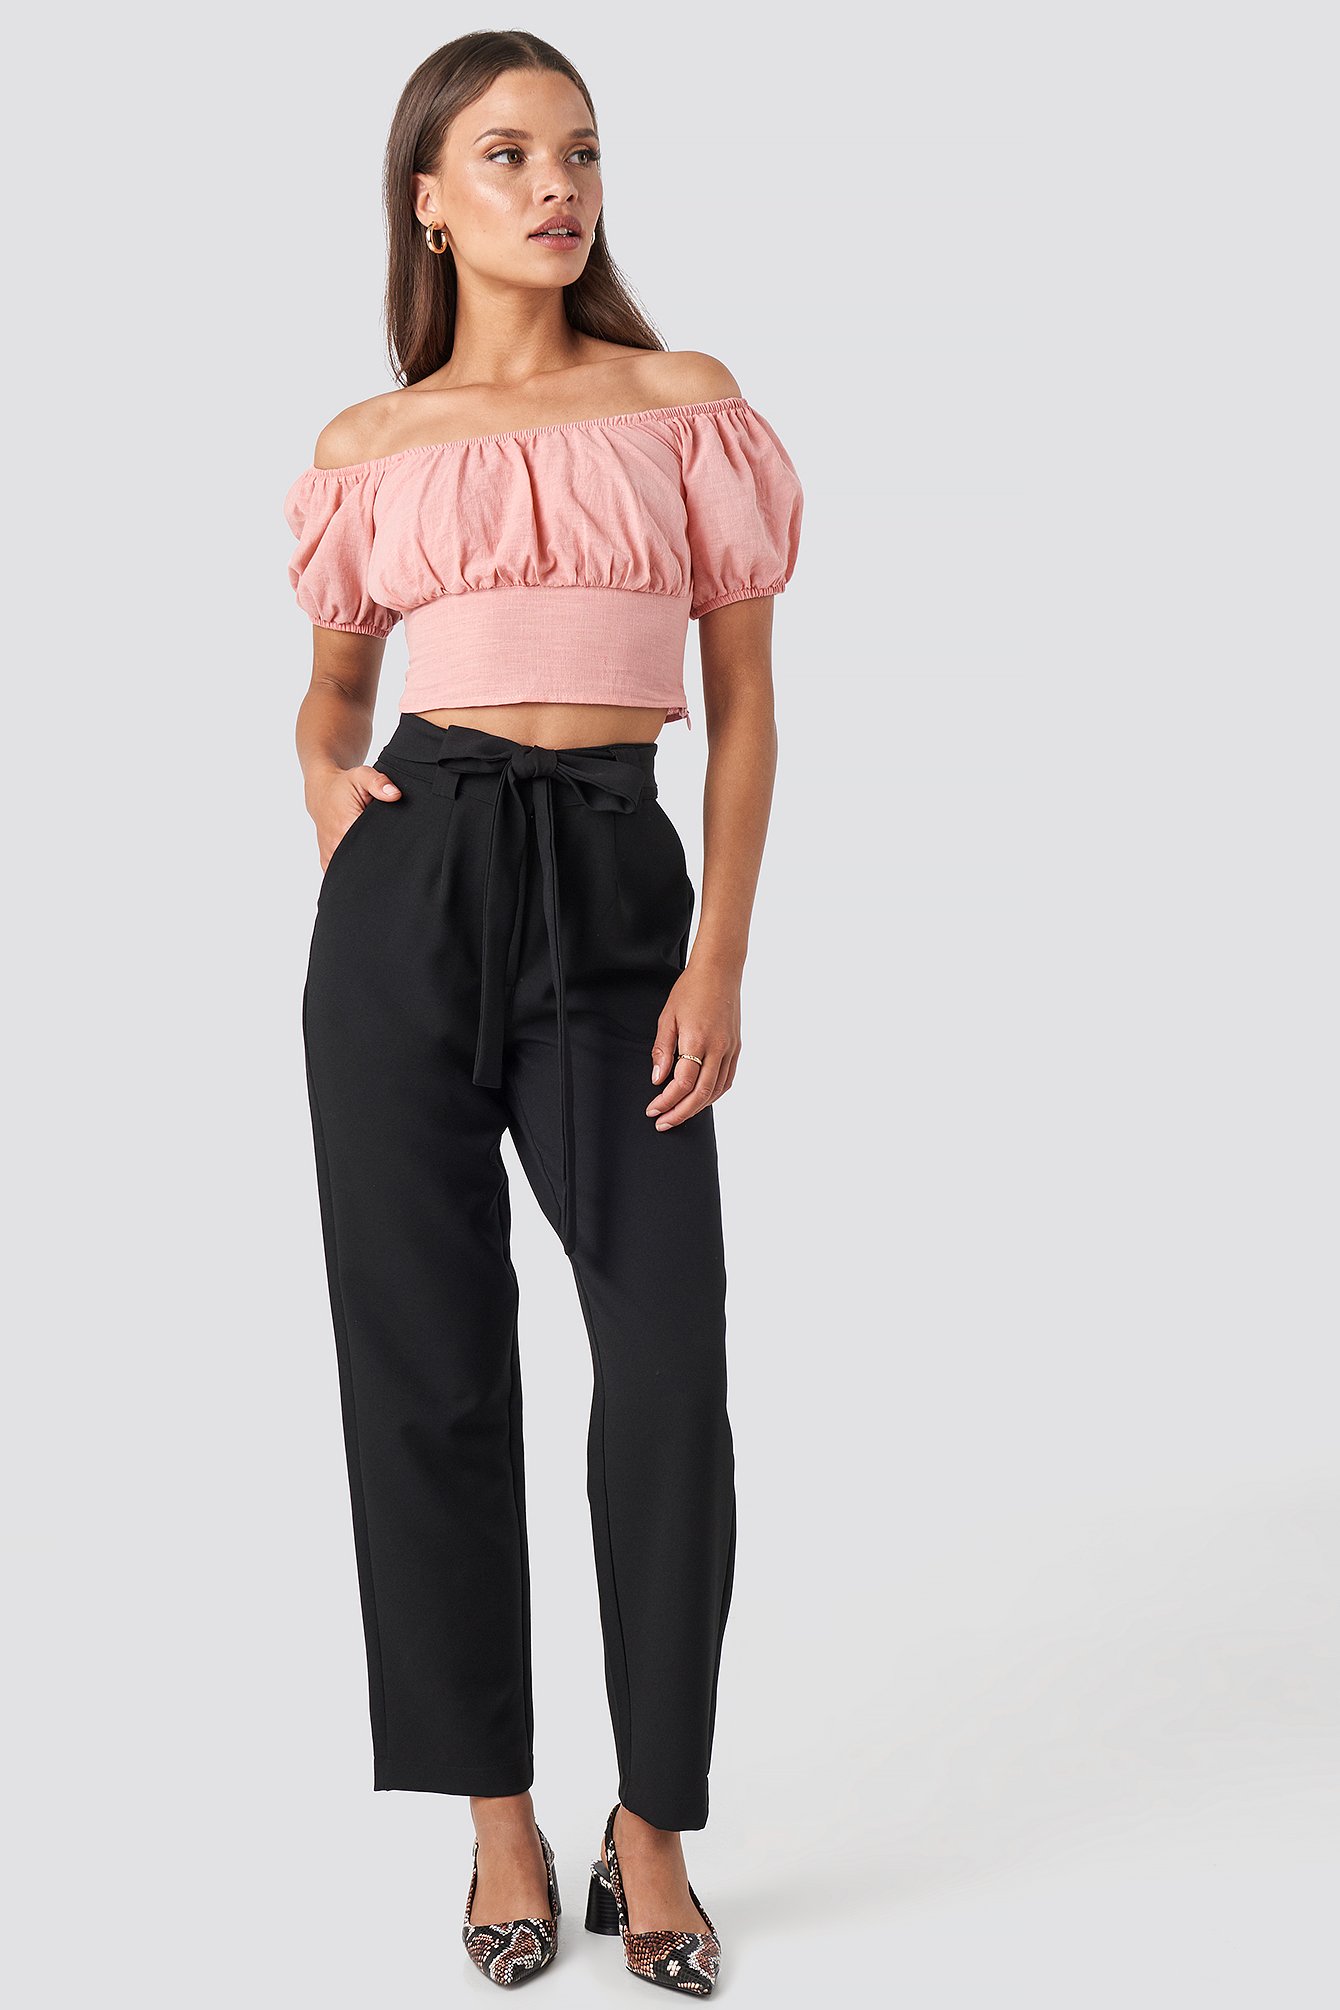 Off Shoulder Puff Sleeve Top Outfit.